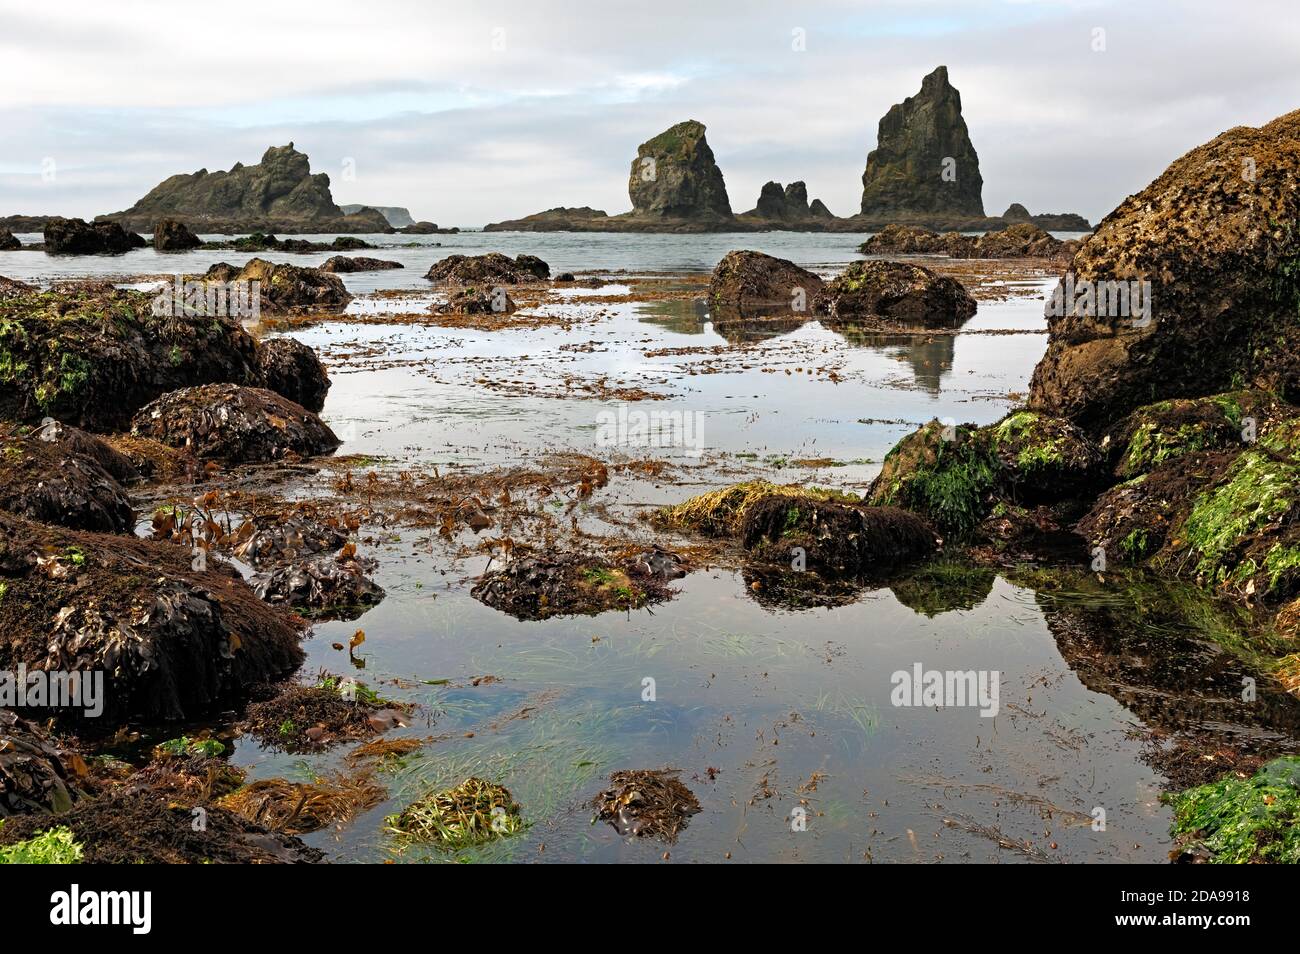 WA18015-00...WASHINGTON - Seaweed and barnacle covered rocks exposed at lowtide along the Pacific Wilderness Coast in Olympic National Park. Stock Photo